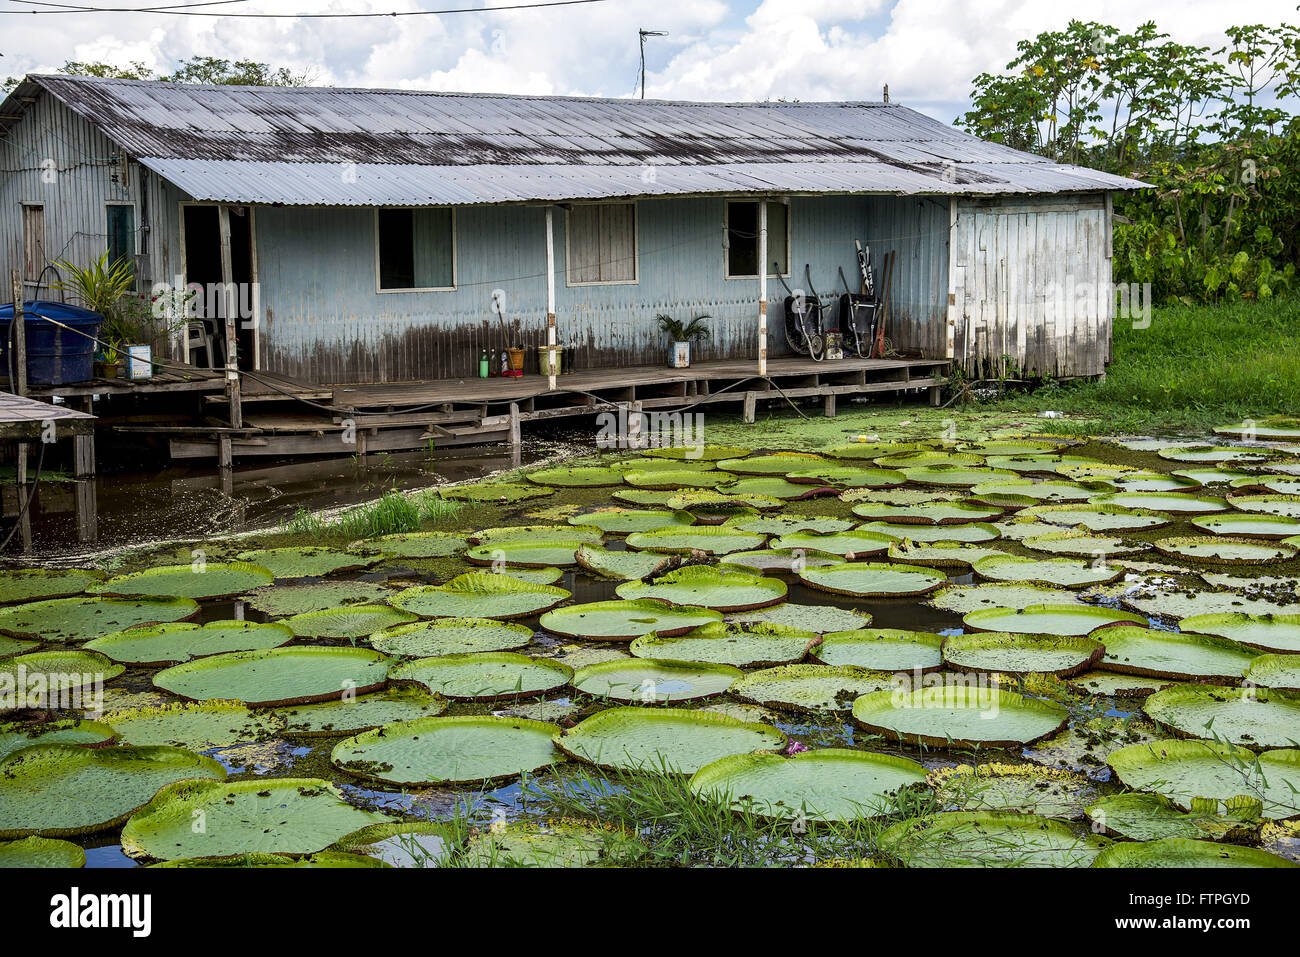 Stilt house in the middle of the Rio Solimoes in full season of full of water lilies Stock Photo